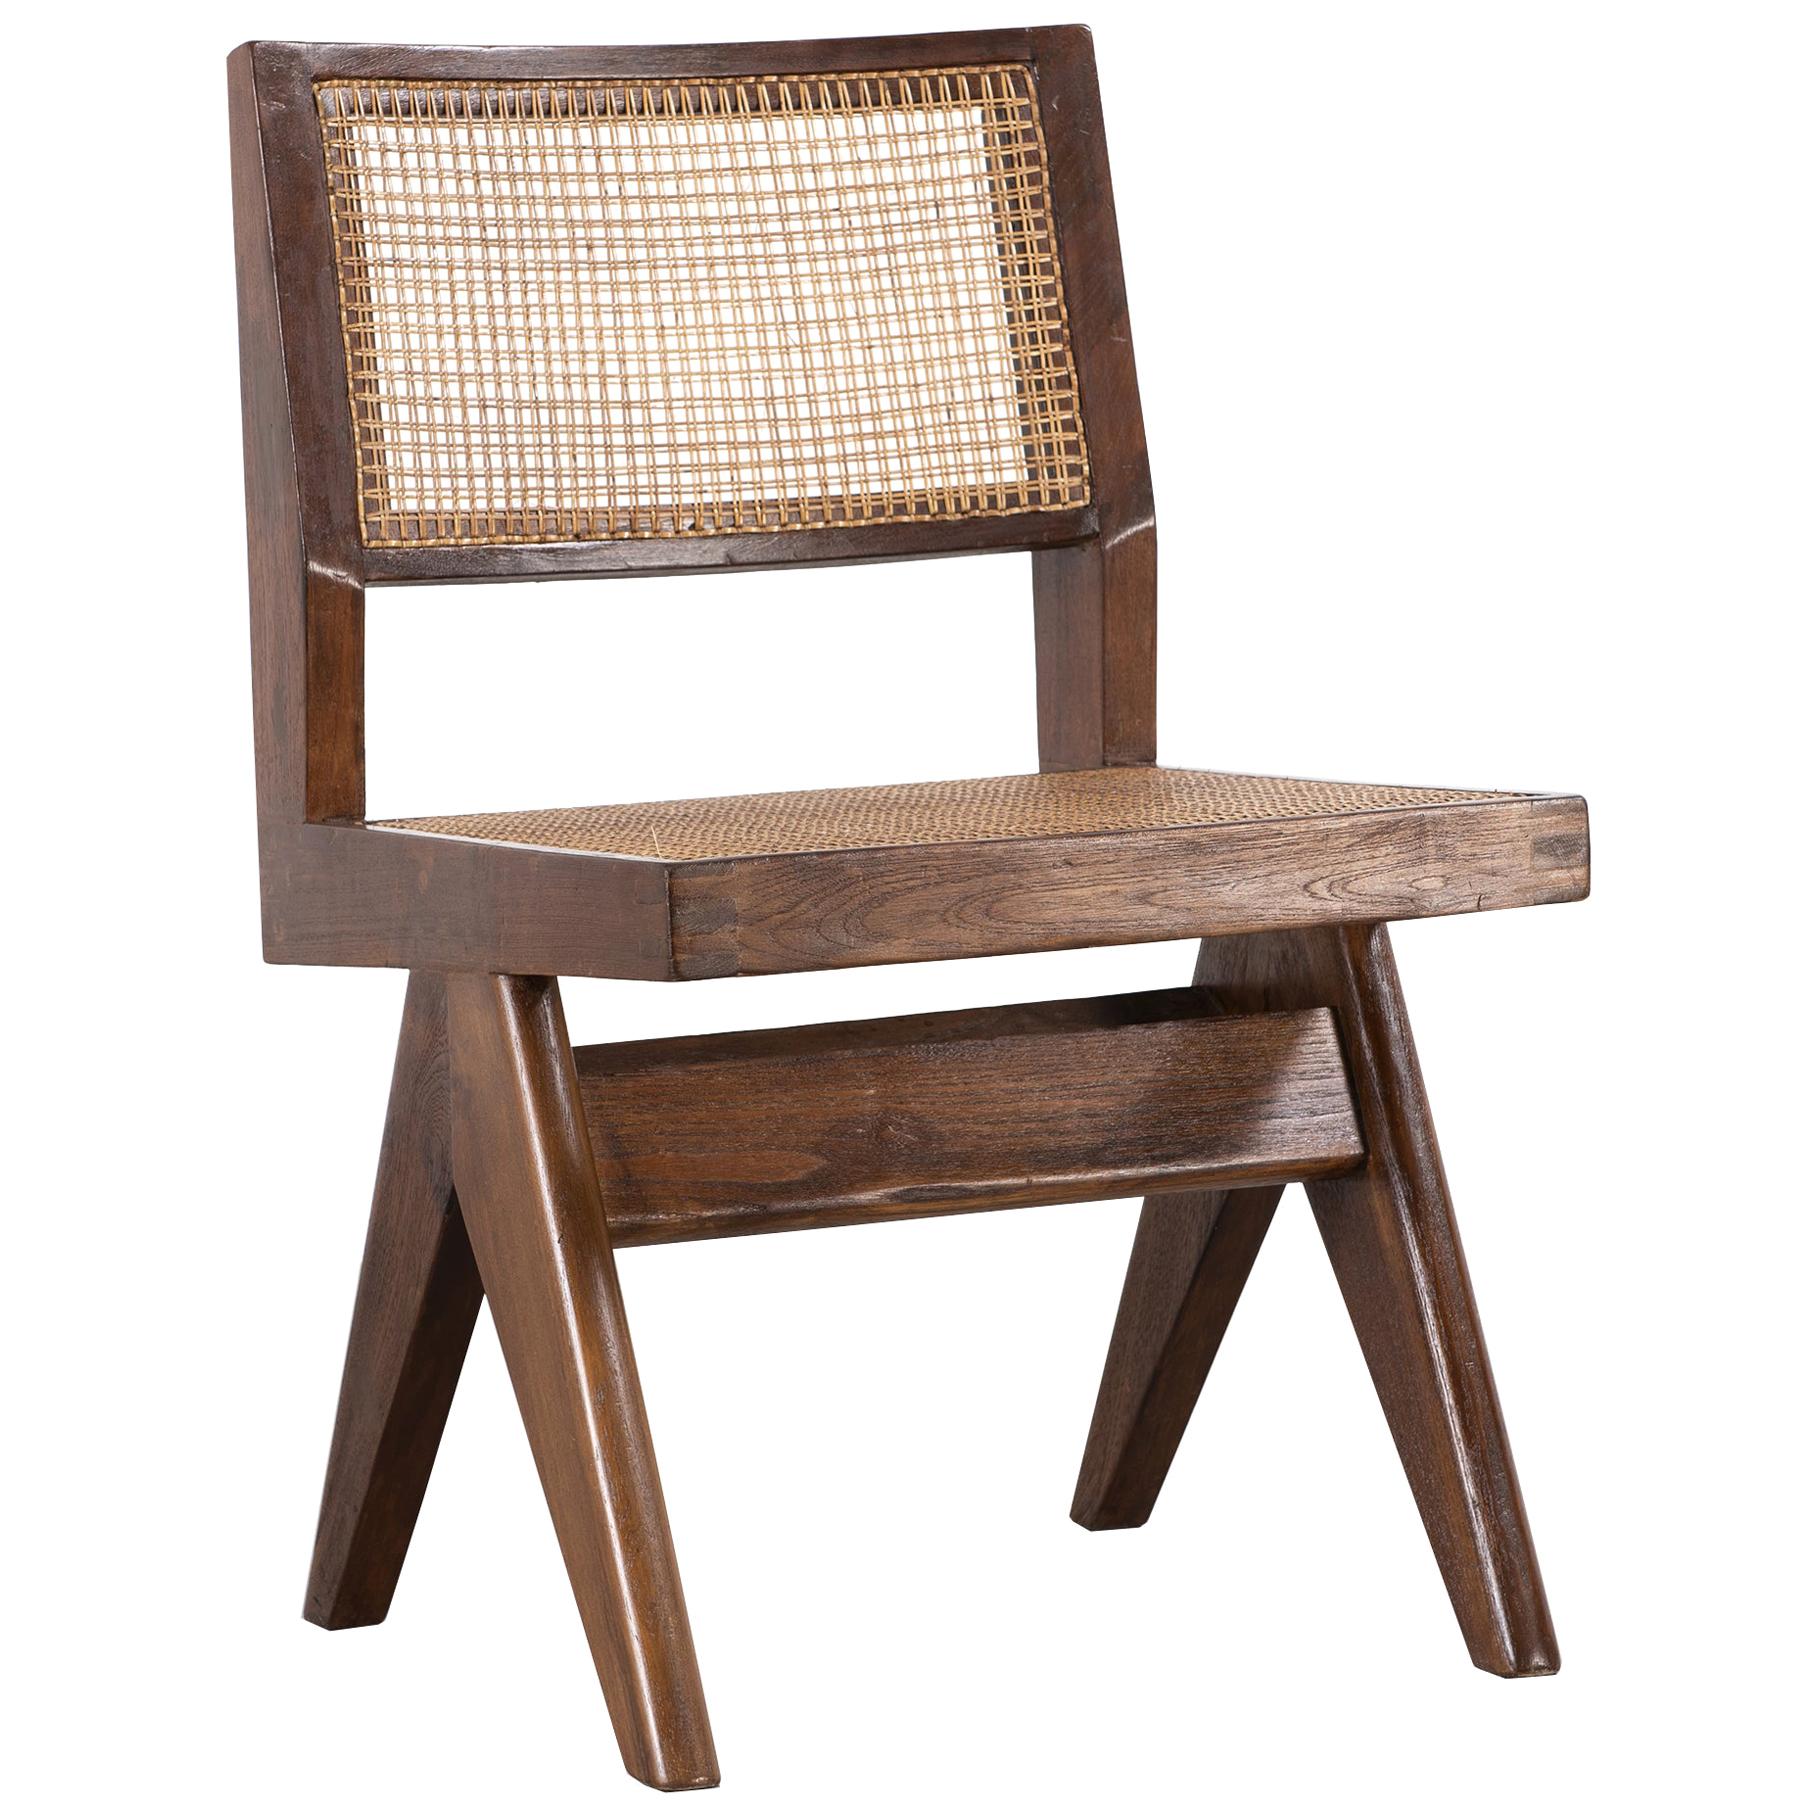 Type Chair